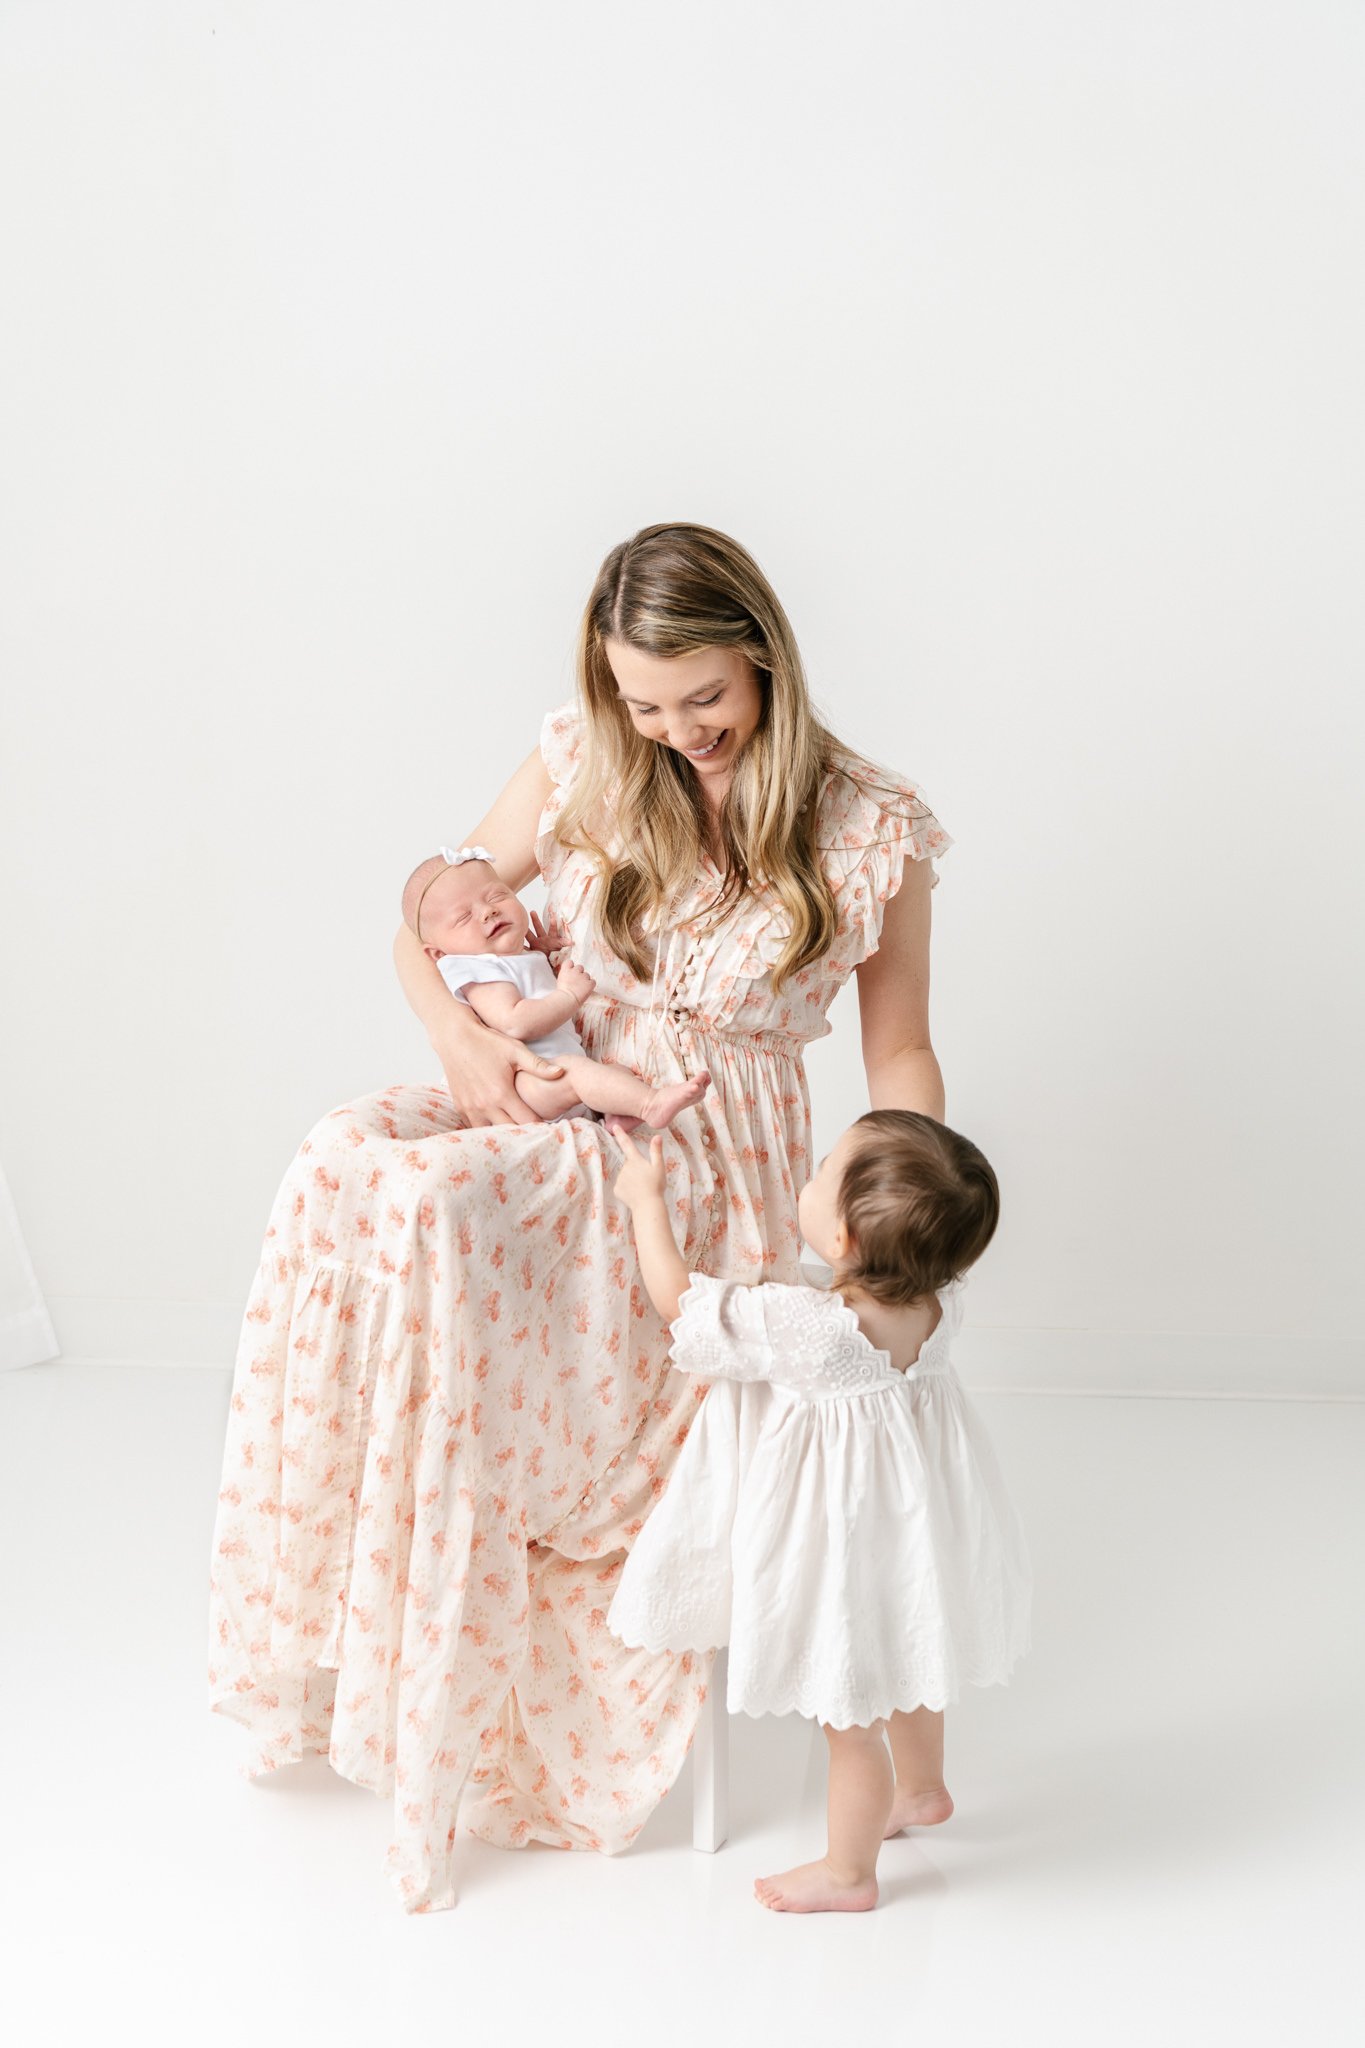  Nicole Hawkins Photography captures a mother with her newborn baby and toddler little girl. two little girls white dress mother poses newborn portraits #NicoleHawkinsPhotography #NicoleHawkinsNewborns #StudioNewborn #StudioFamily #EastCoastNewbornPh